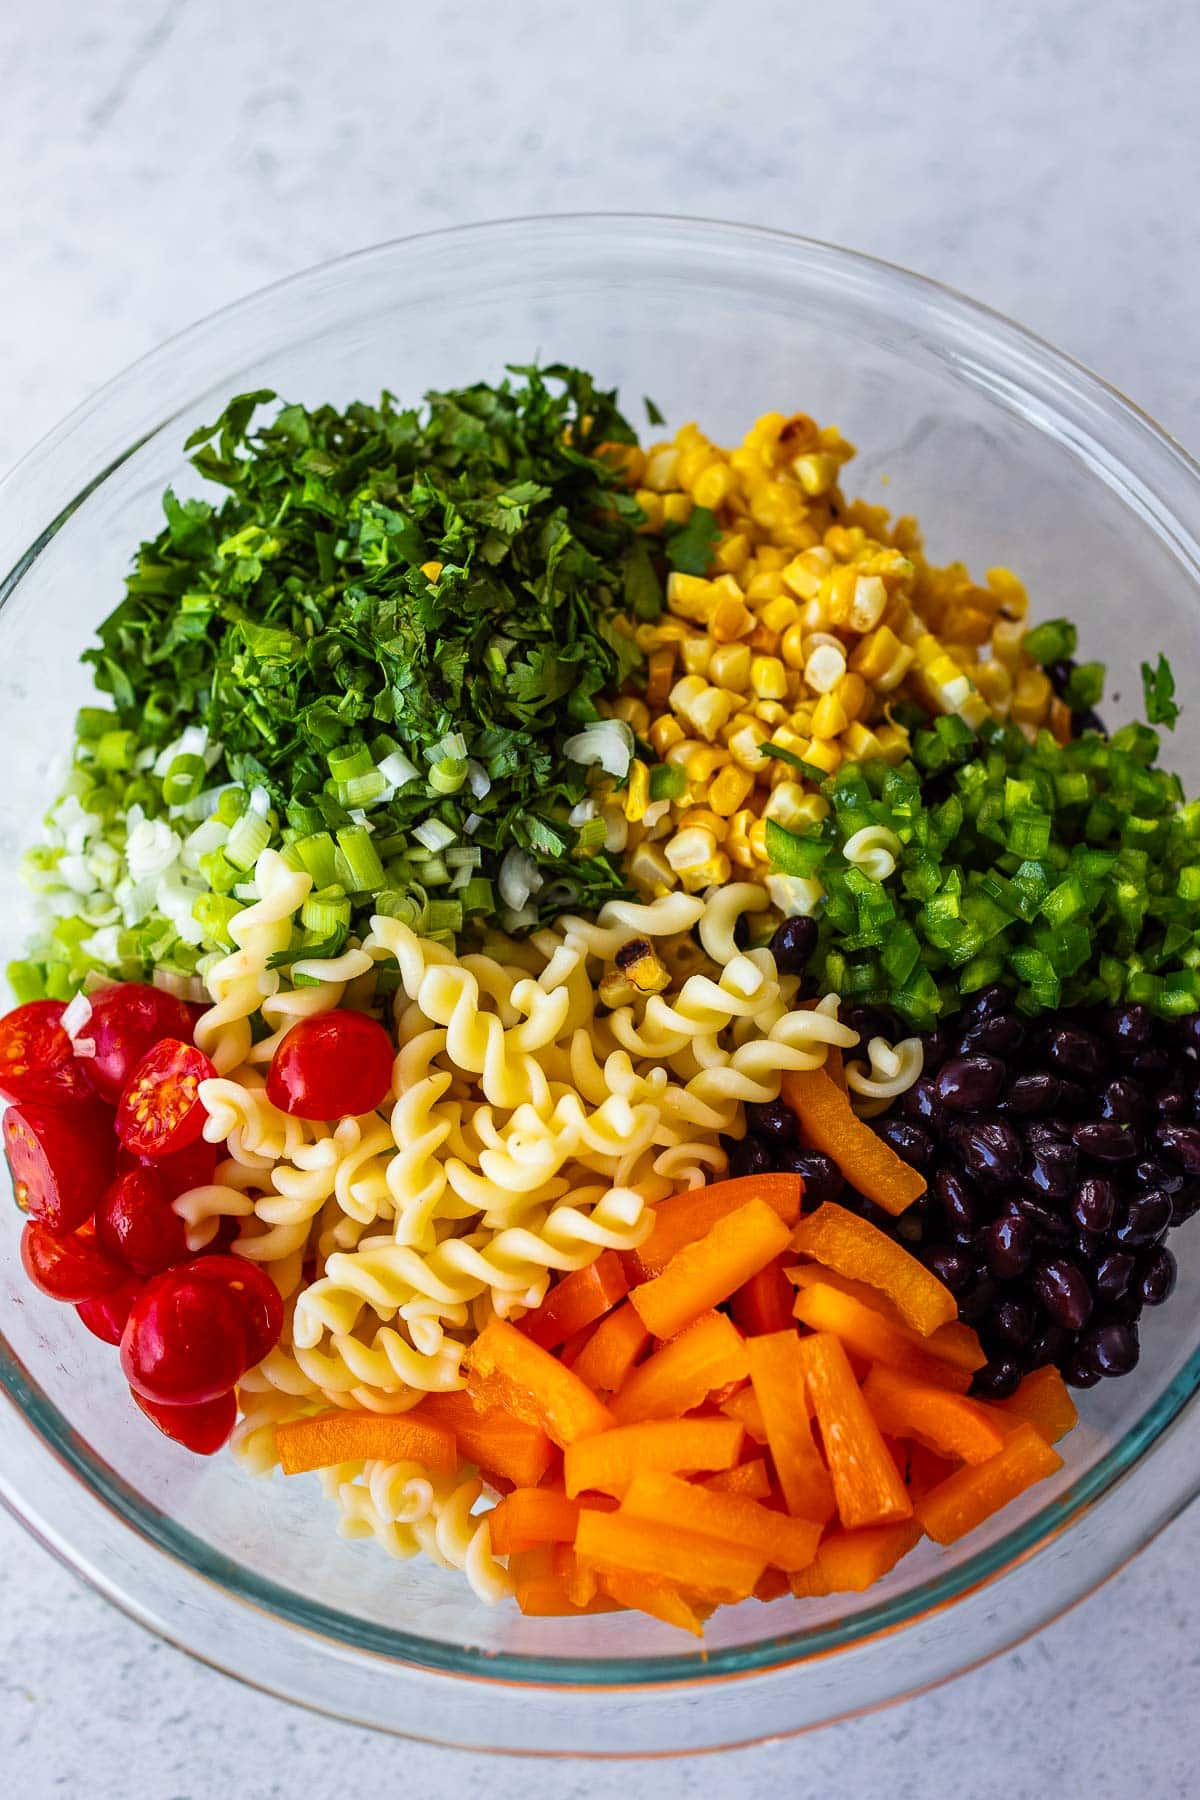 Southwest pasta salad ingredients in a bowl ready to toss.